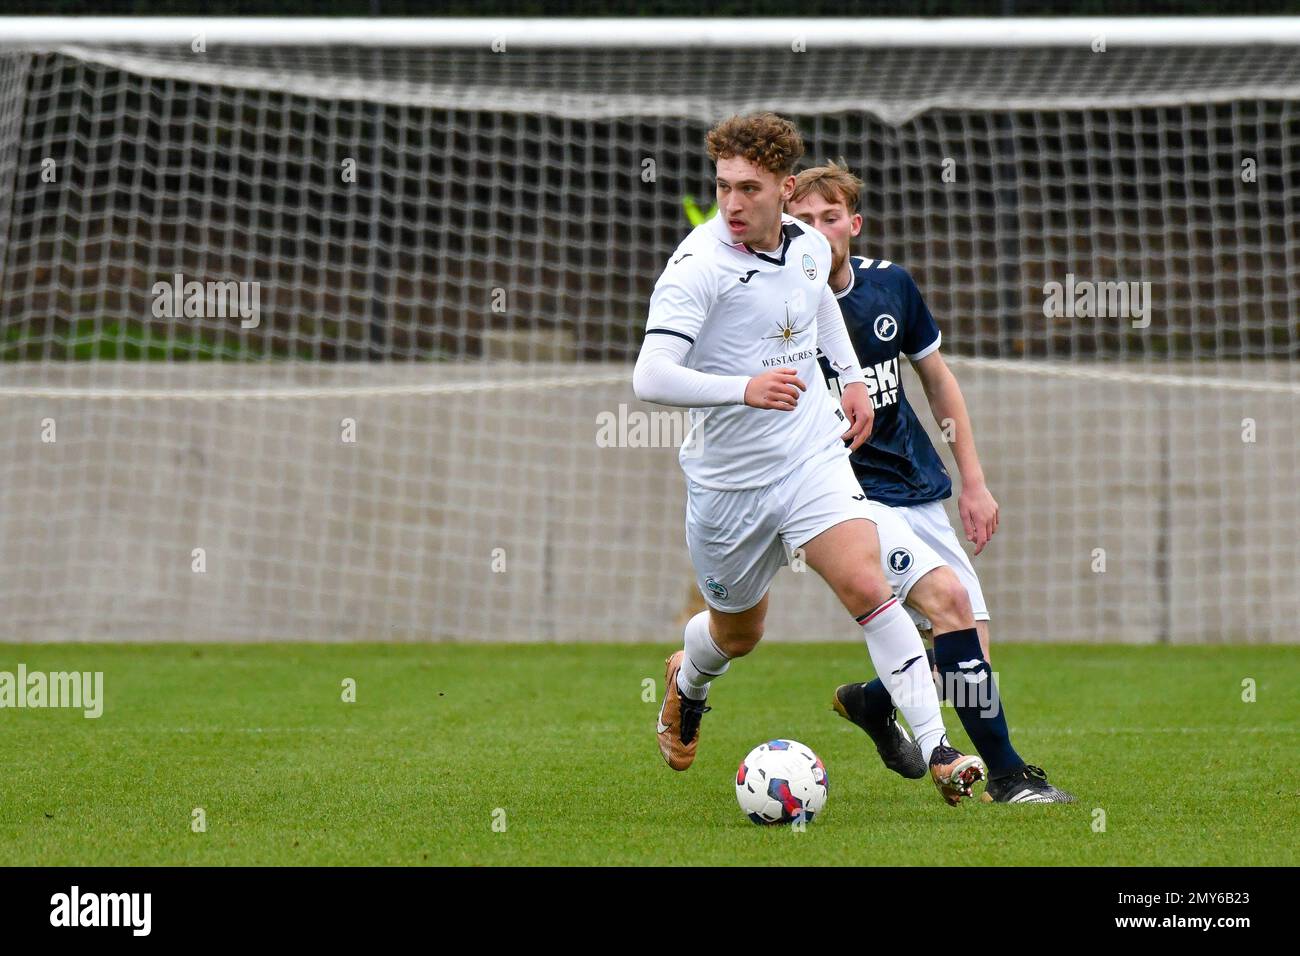 Swansea, Wales. 4 February 2023. Iwan Morgan of Swansea City under pressure from Ernie Cheeseman of Millwall during the Professional Development League game between Swansea City Under 18 and Millwall Under 18 at the Swansea City Academy in Swansea, Wales, UK on 4 February 2023. Credit: Duncan Thomas/Majestic Media. Stock Photo